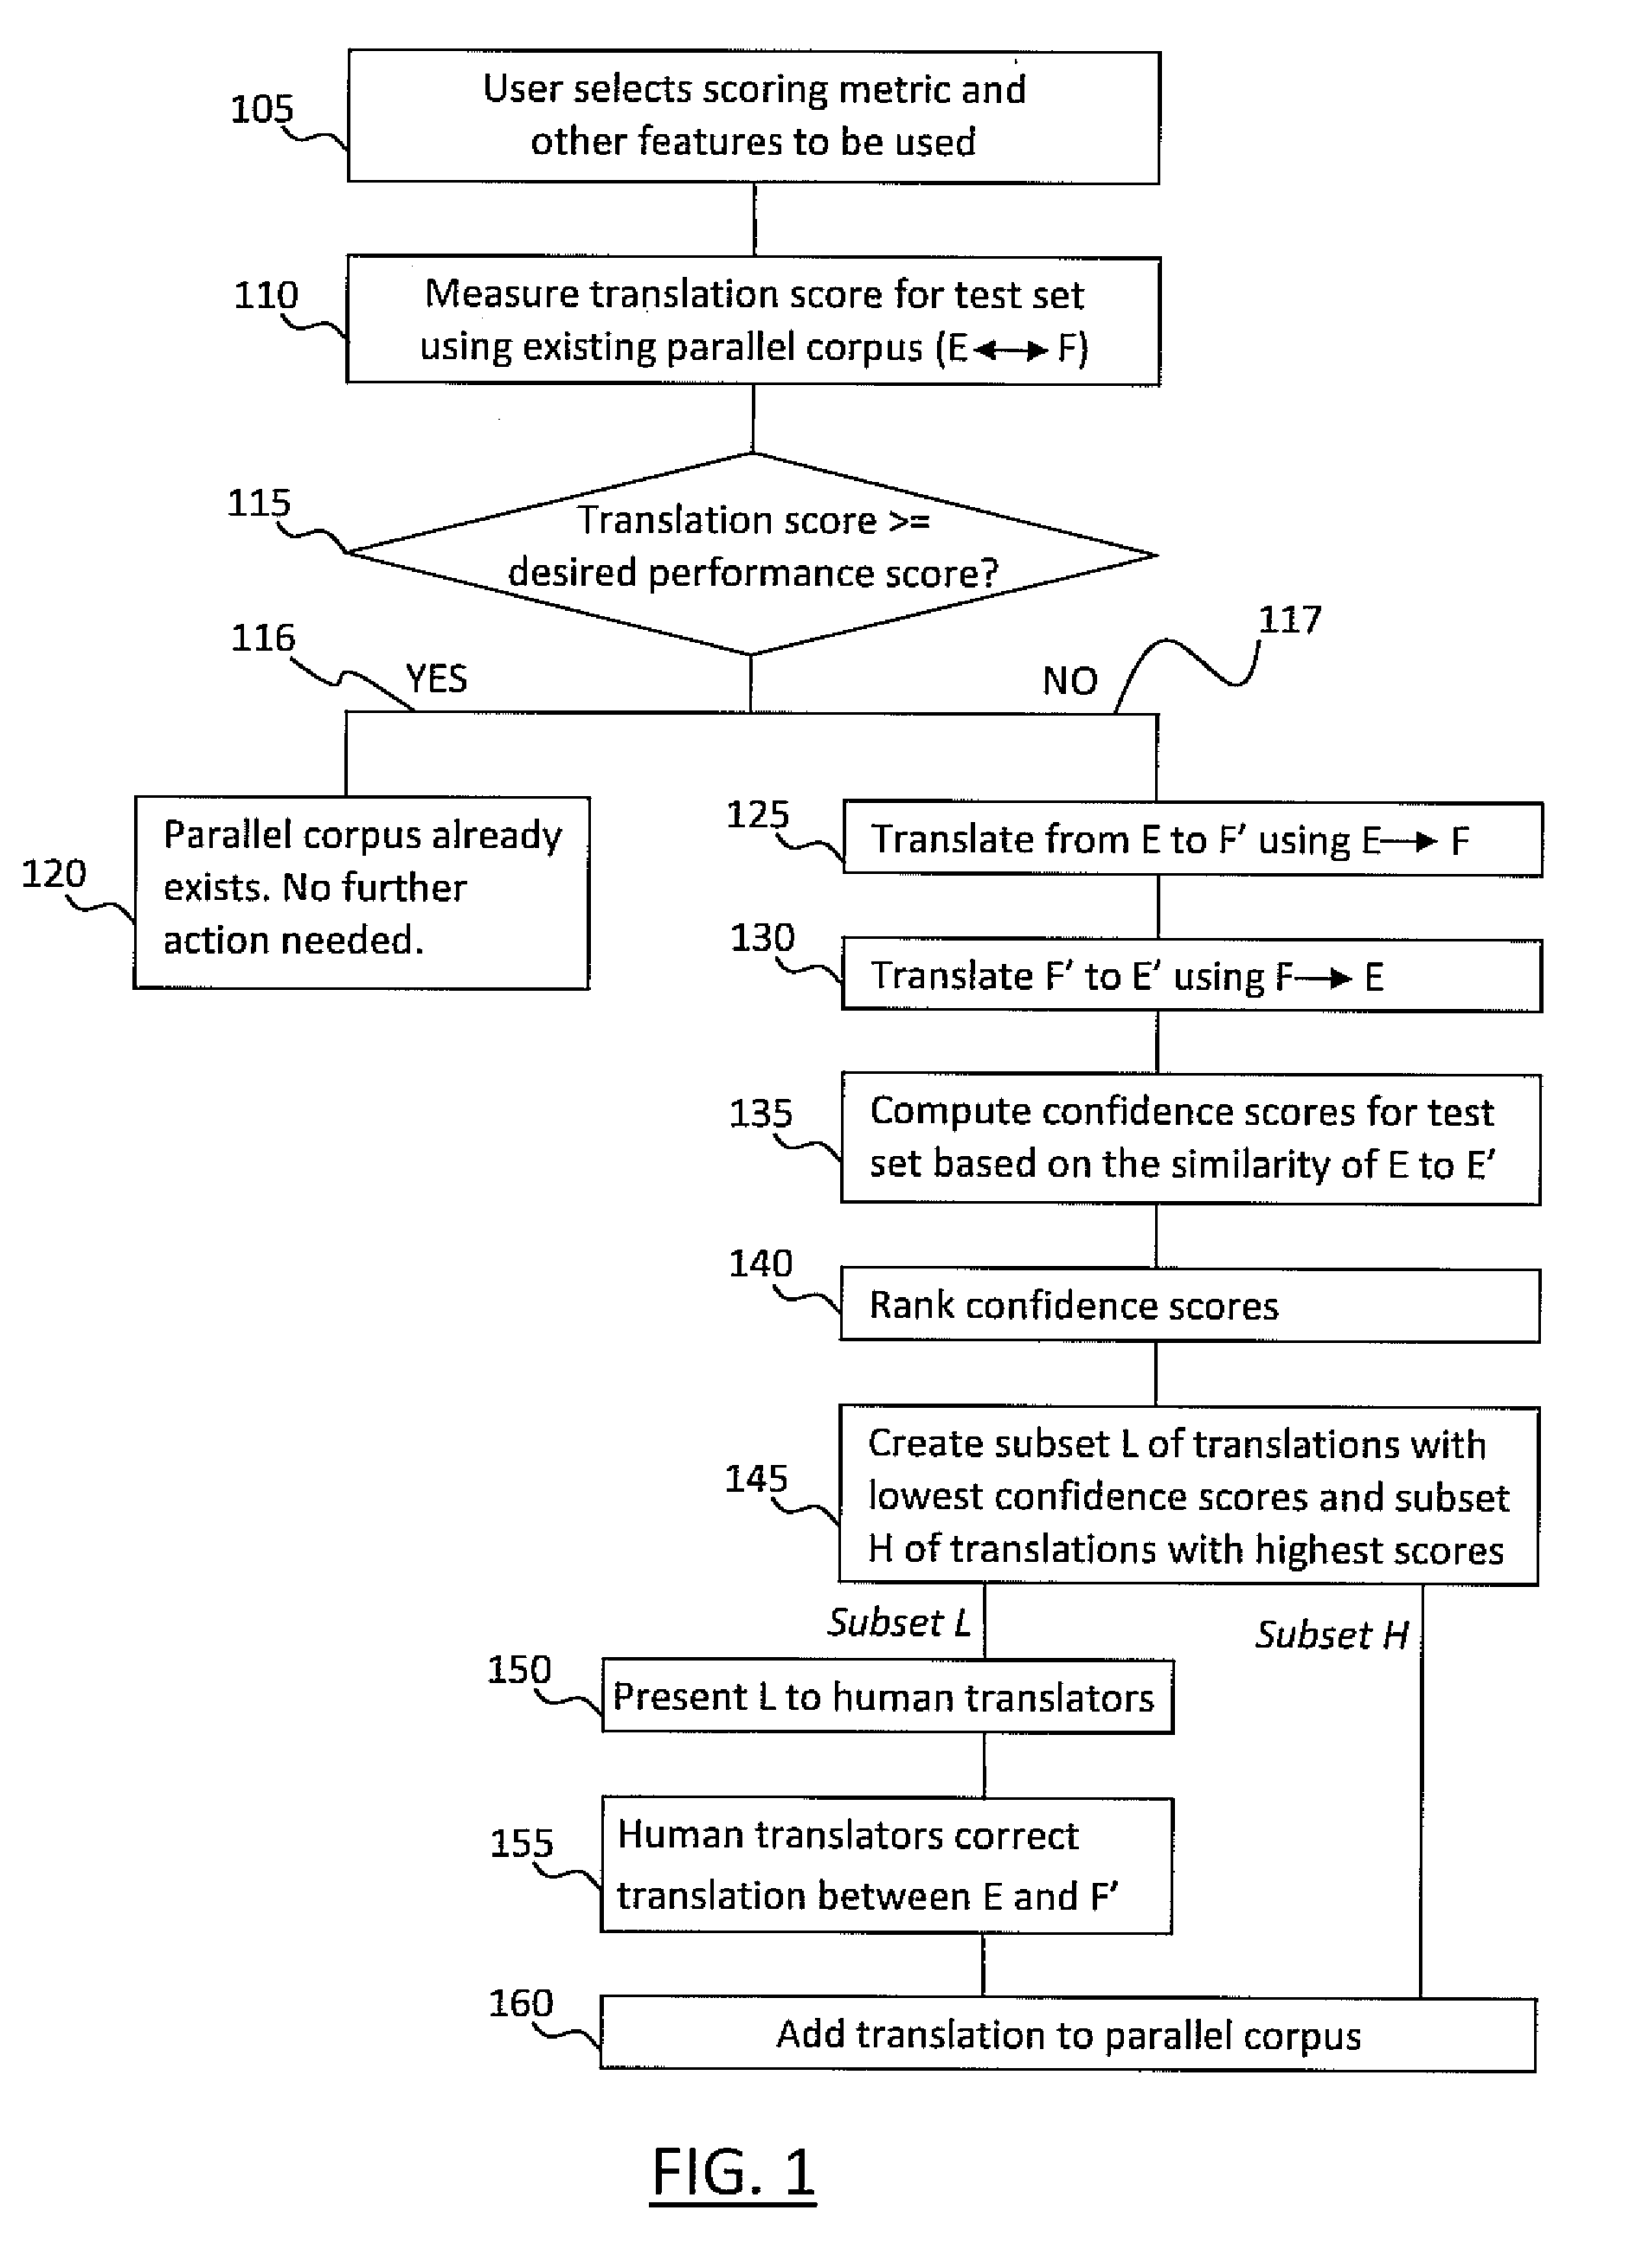 Active learning systems and methods for rapid porting of machine translation systems to new language pairs or new domains